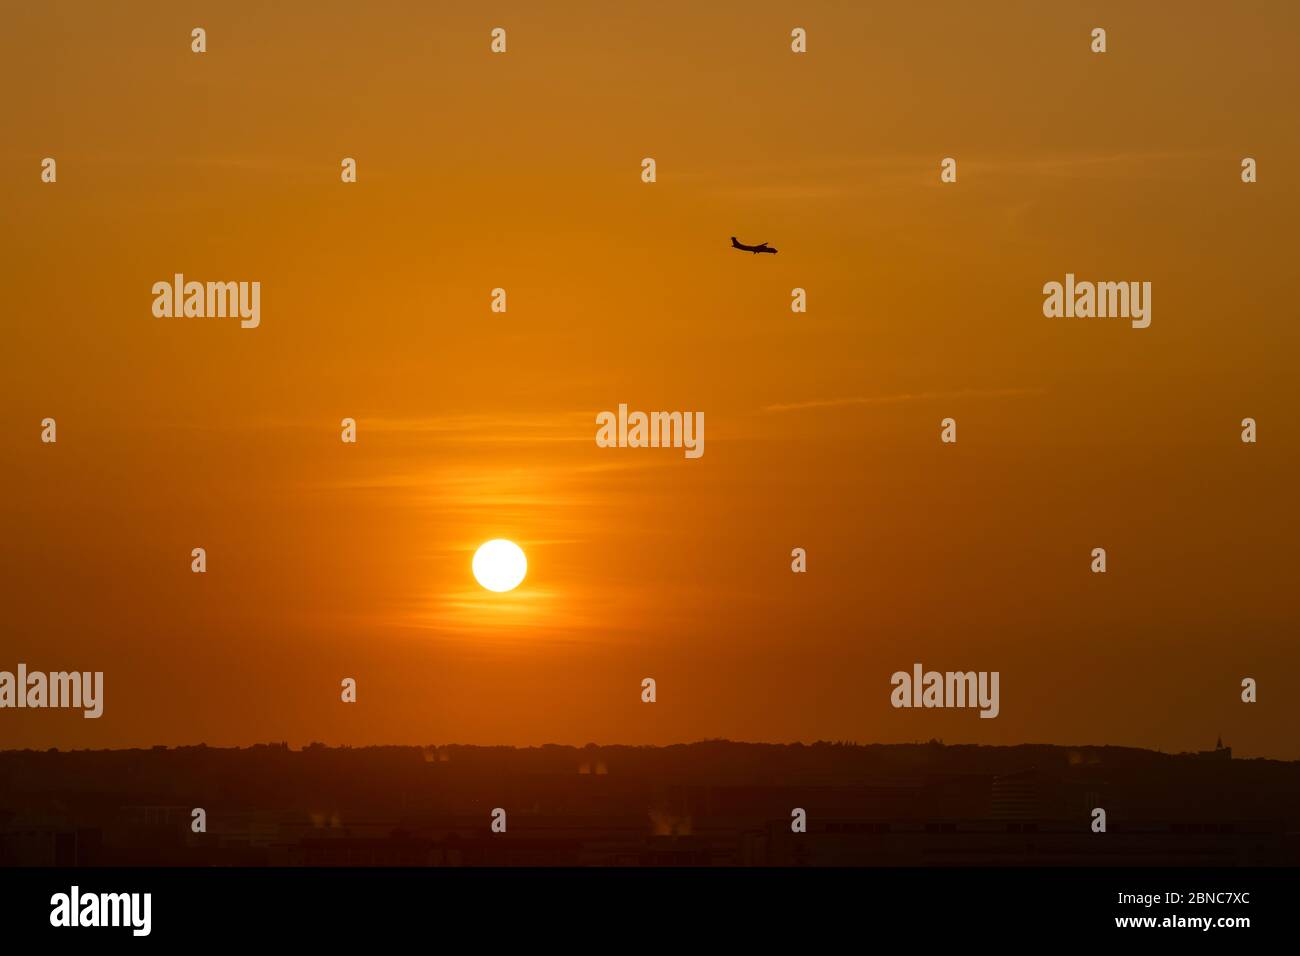 Seting sun with an airplane silhouette in colourful sky background Stock Photo